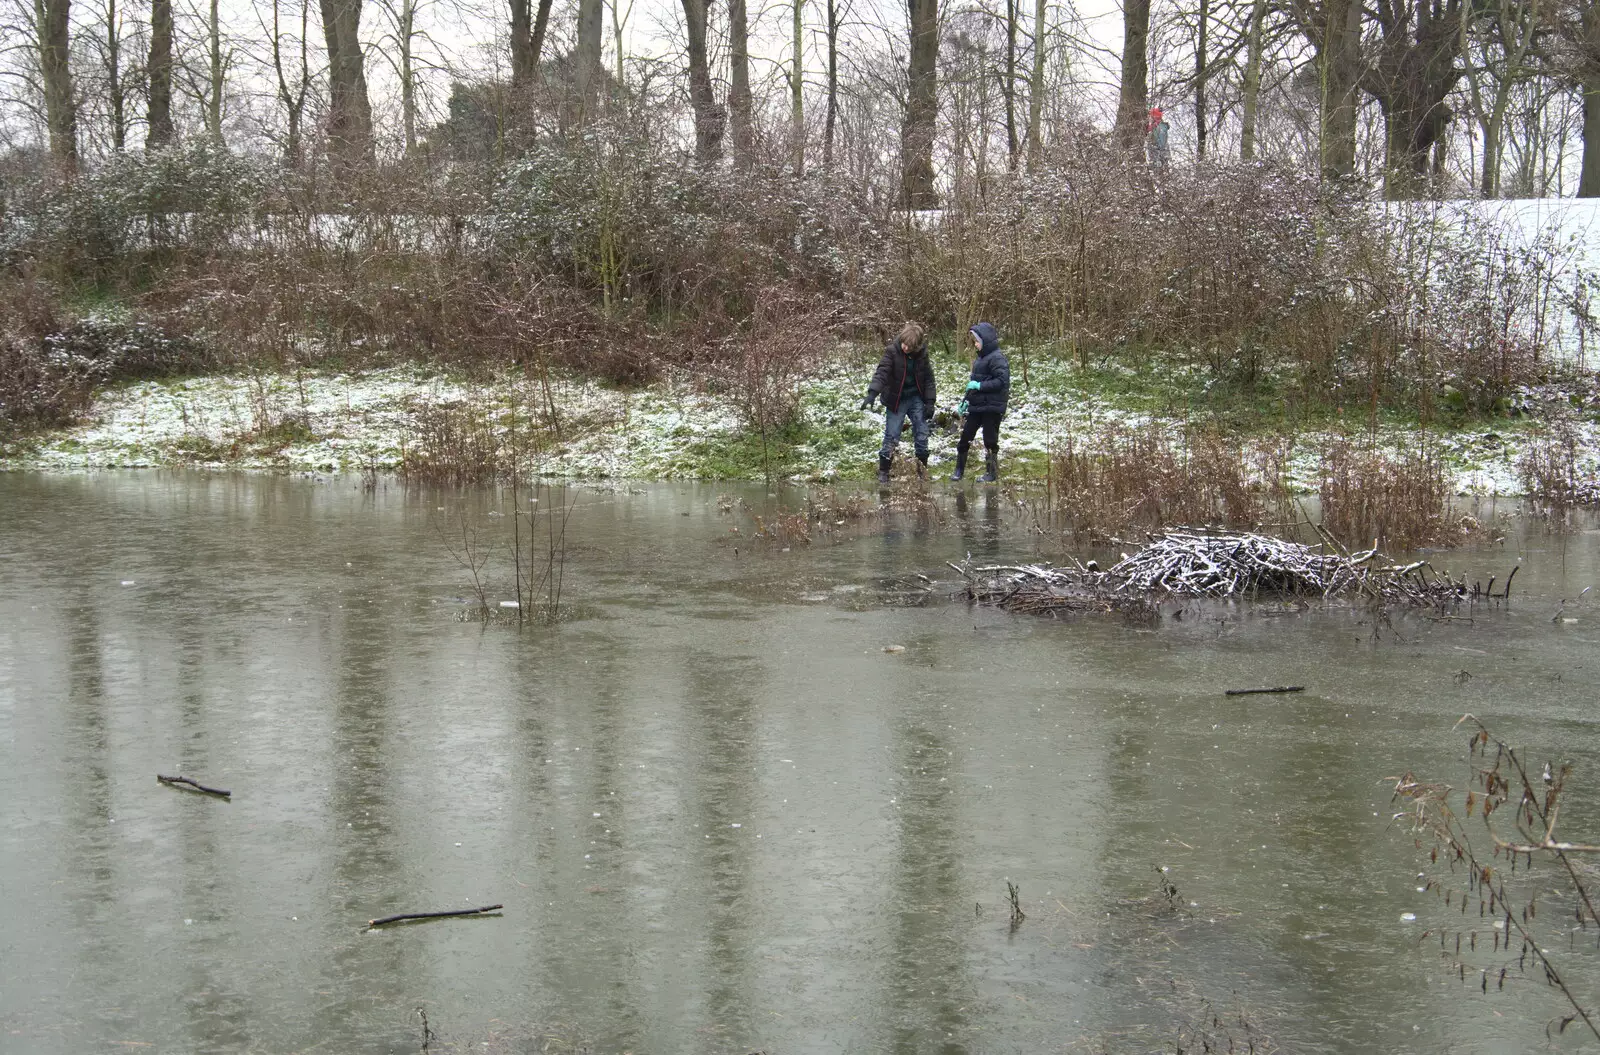 The boys by the frozen pond, from Winter Lockdown Walks, Thrandeston and Brome, Suffolk - 24th January 2021